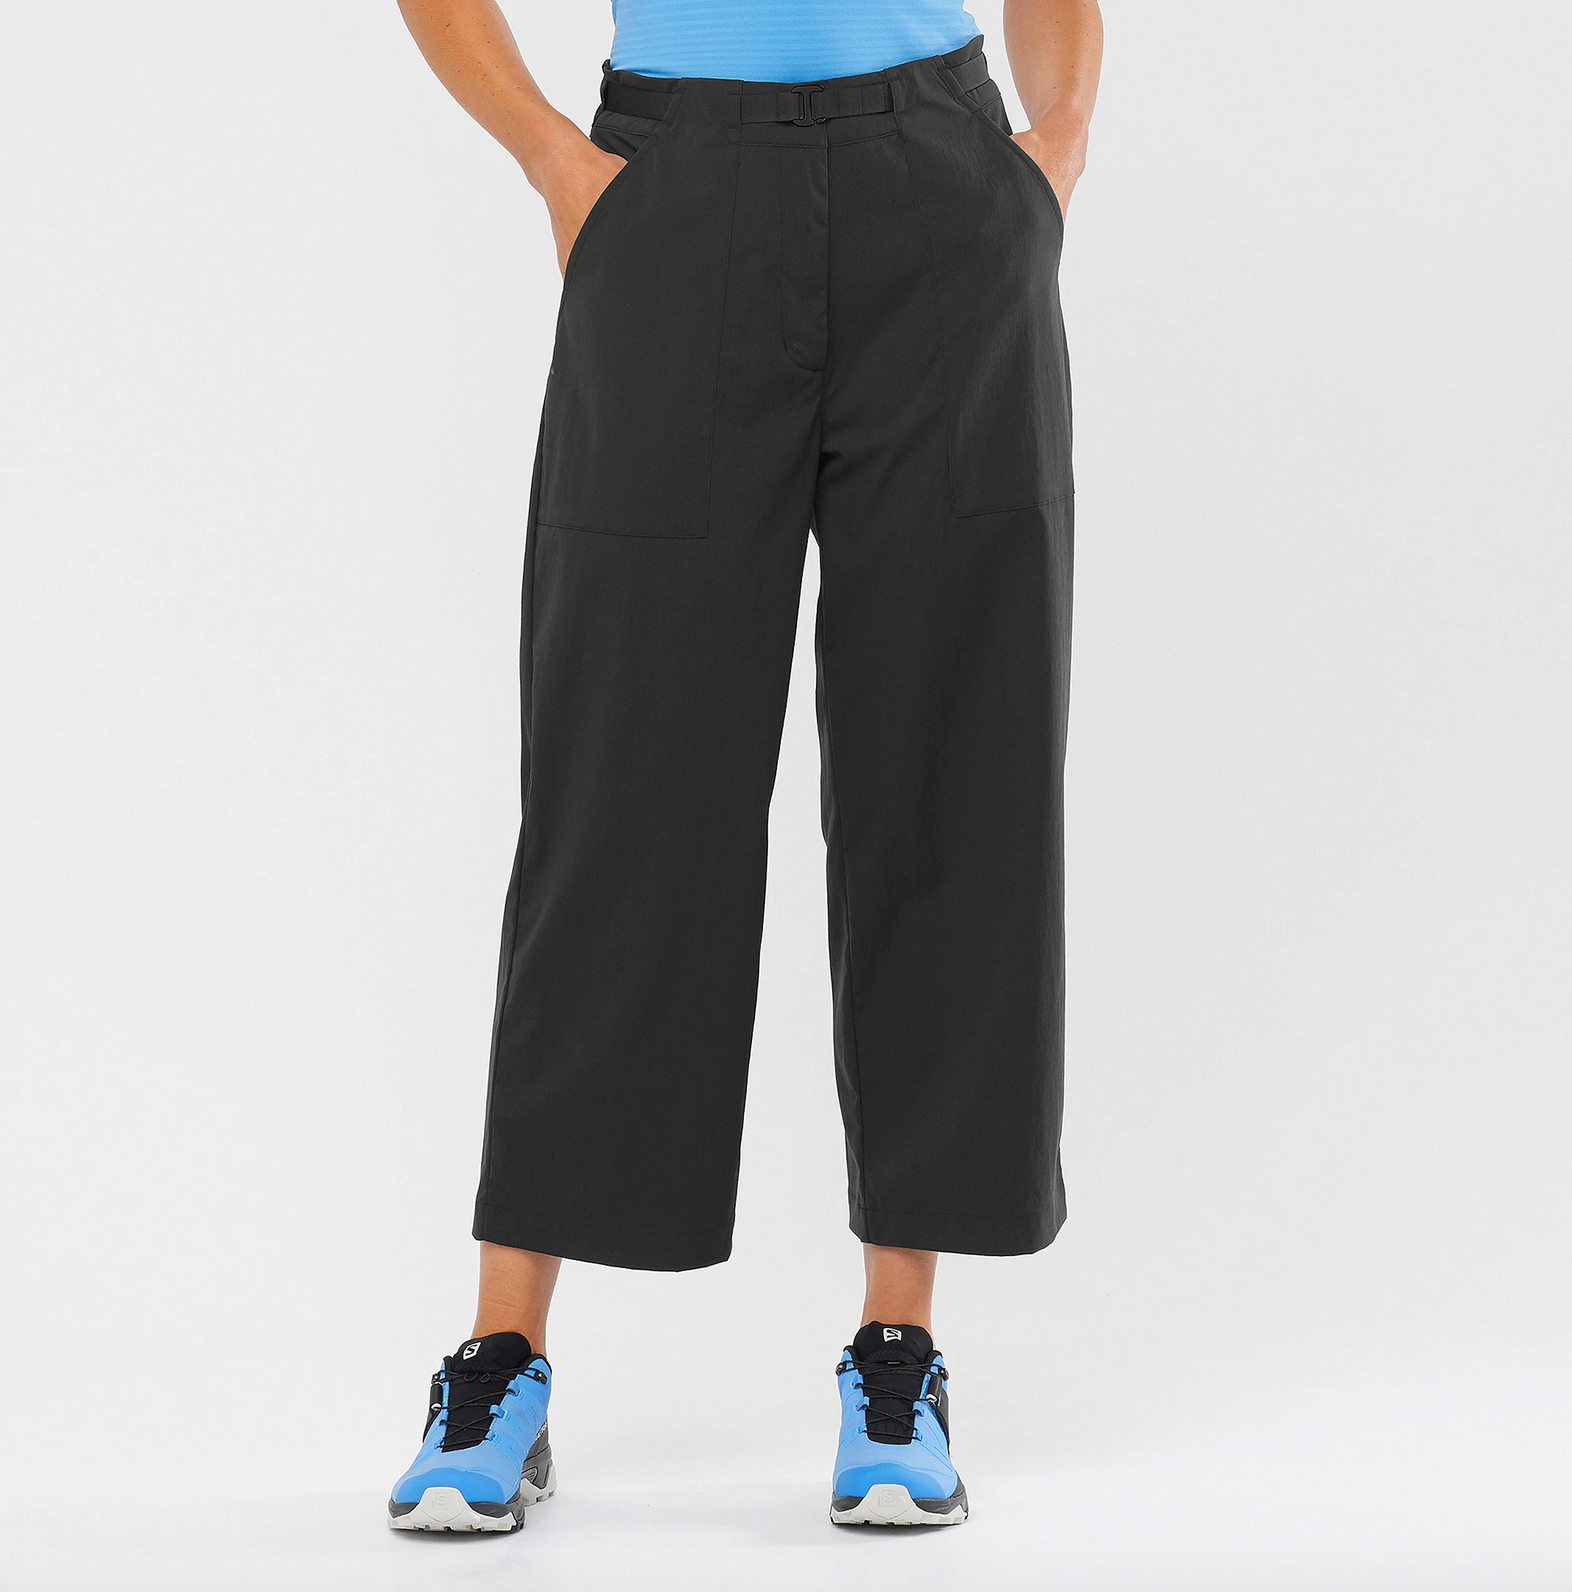 Women's Outrack High Pants-5